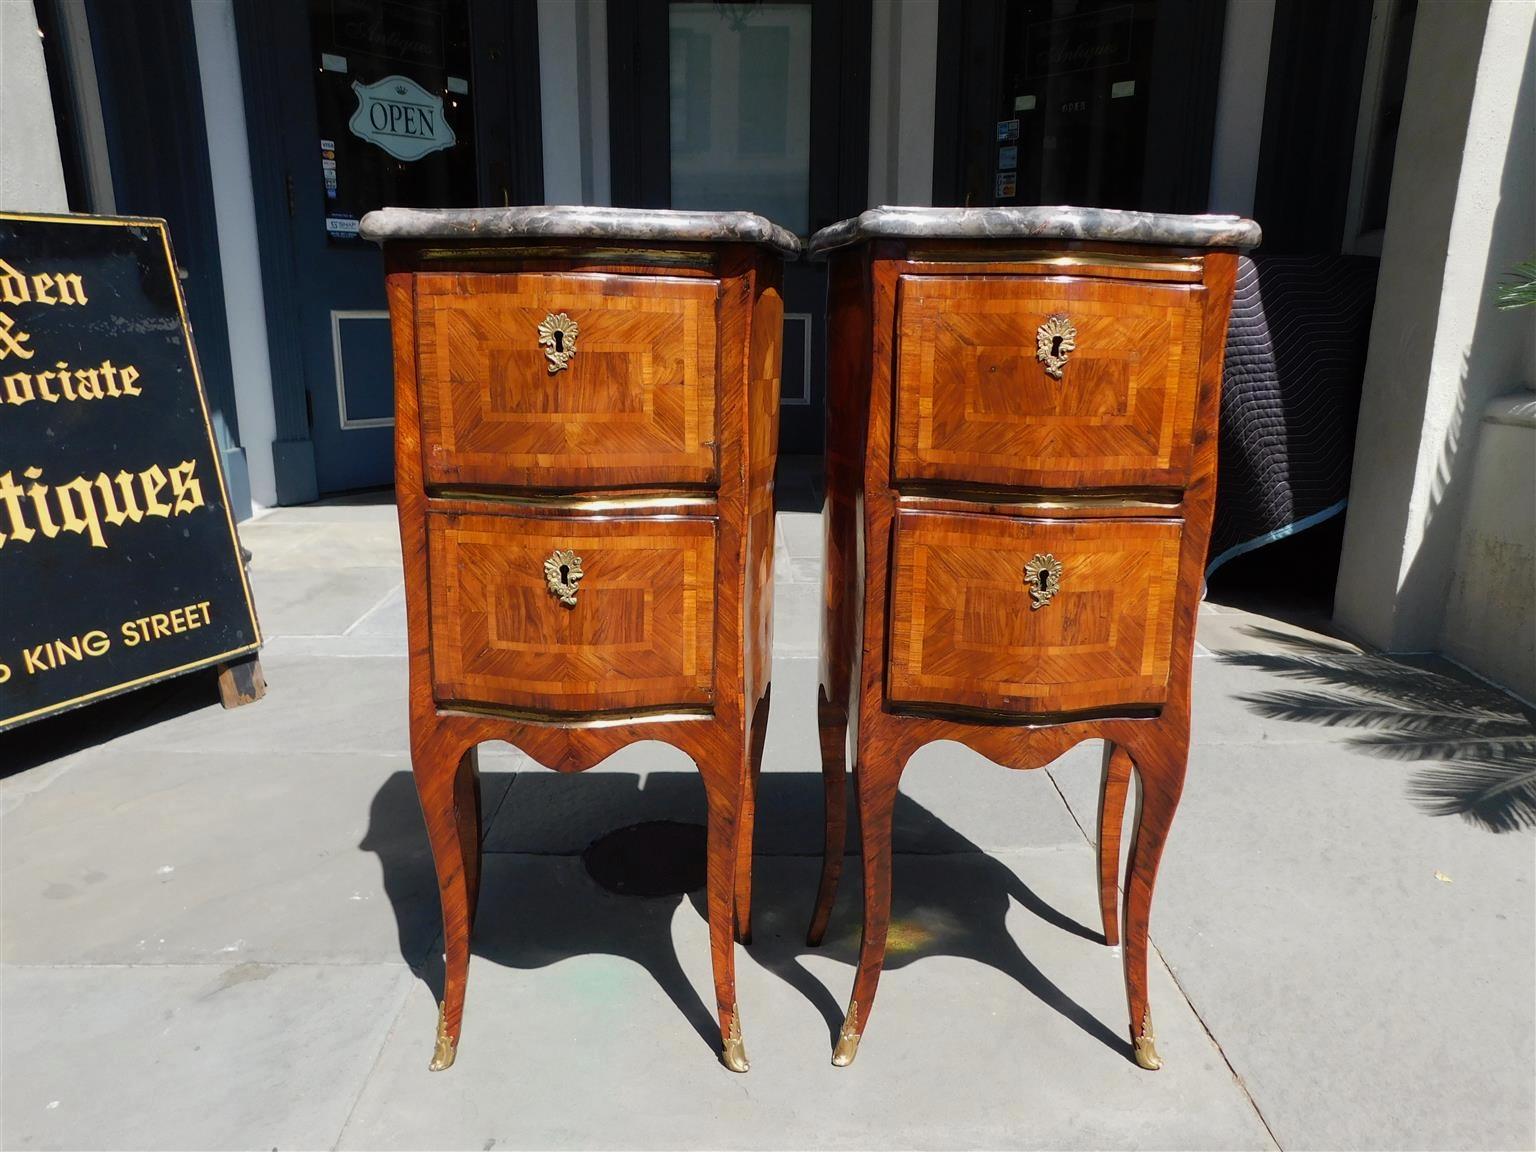 Pair of Italian marble top marquetry inlaid serpentine two drawer commodes with brass banding and foliage escutcheons, interior locks with key, and terminating on shaped cabriole legs with brass foliage capped feet, Late 18th century.